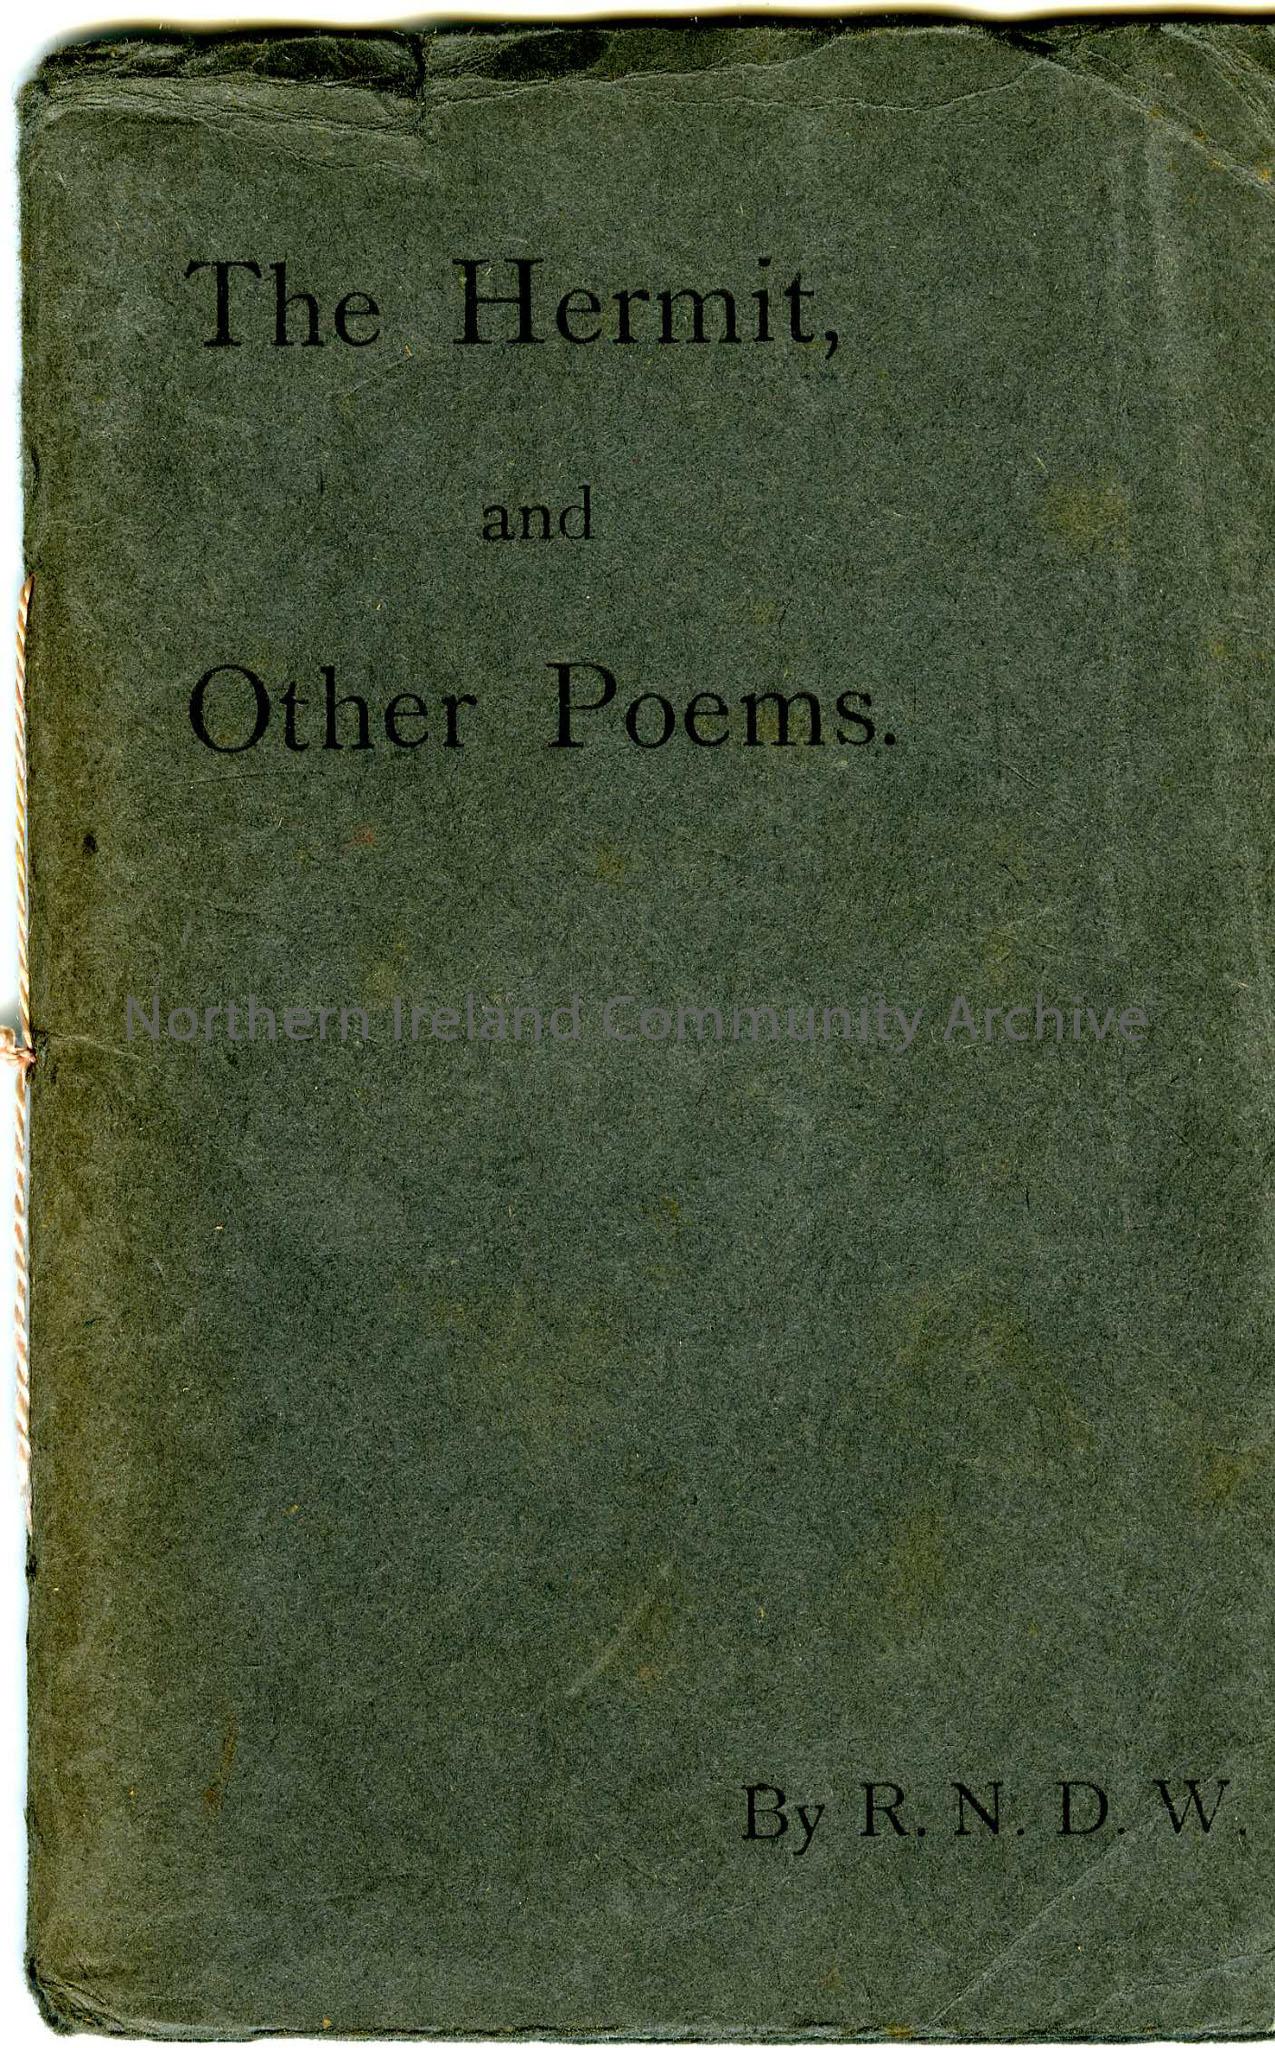 The Hermit and Other Poems